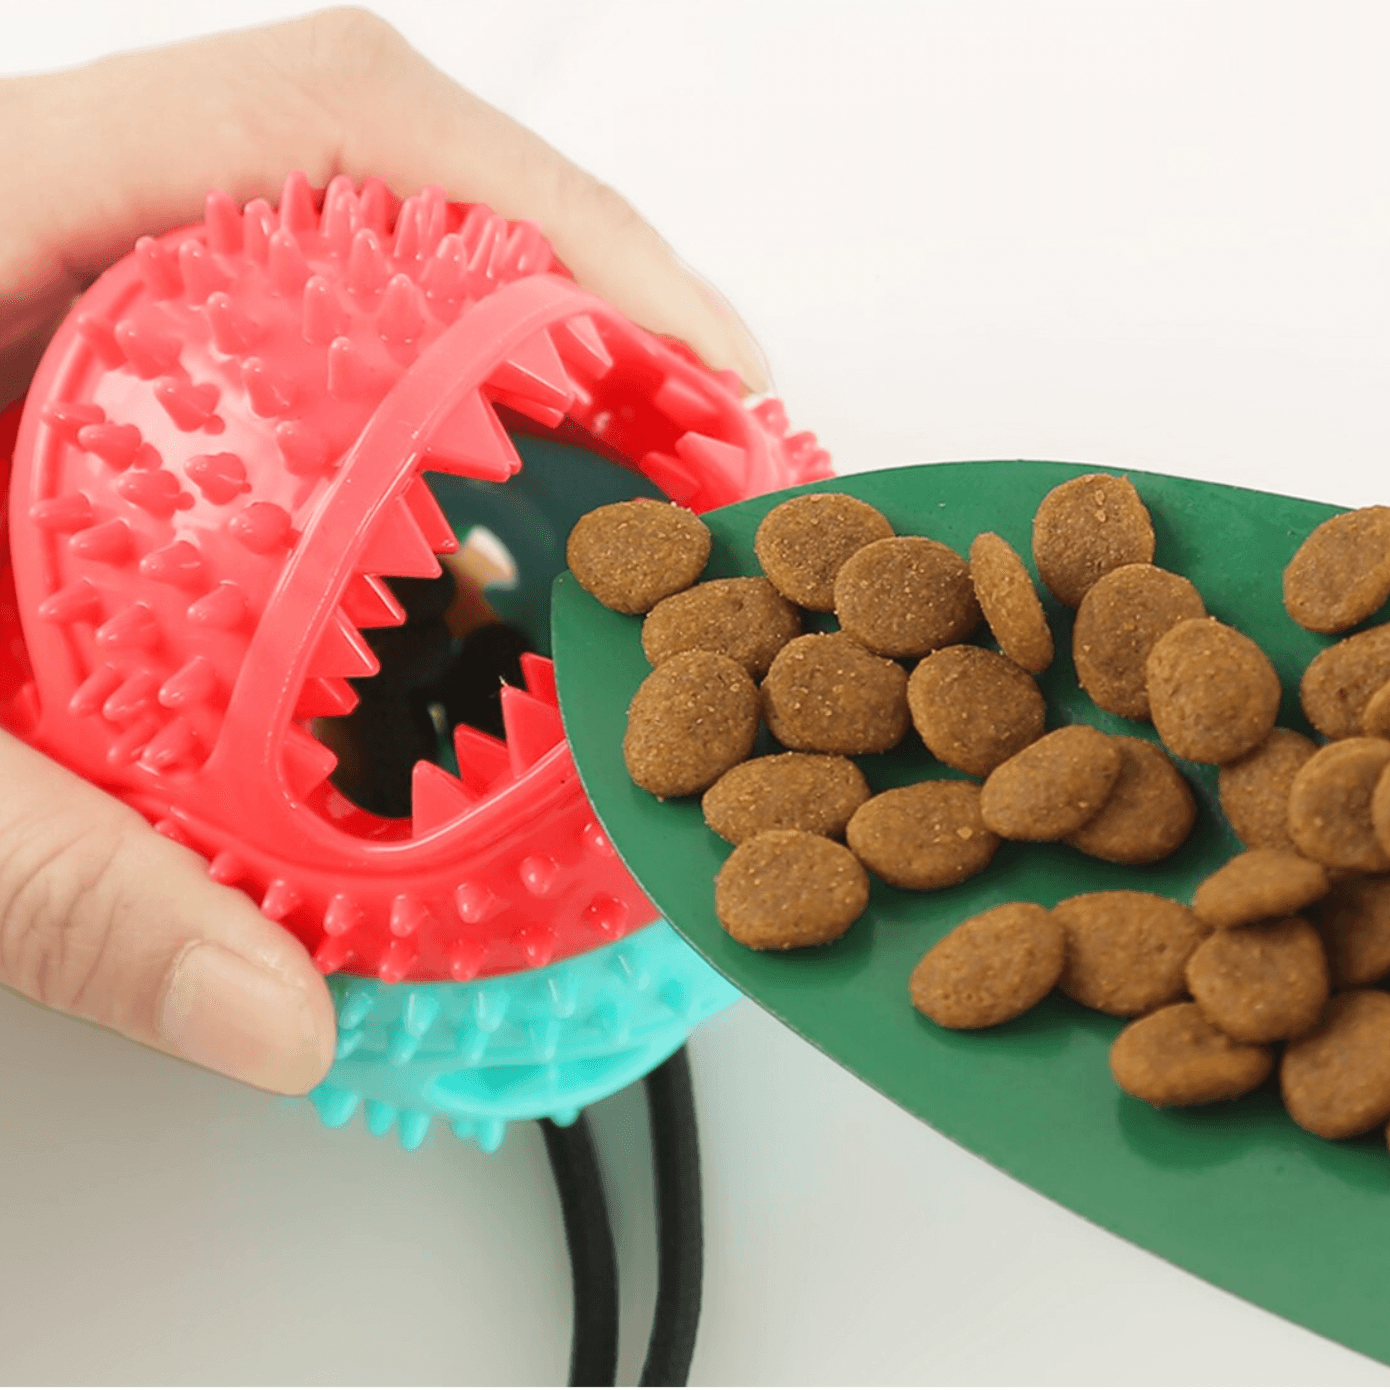 Suction Cup Tug Toy